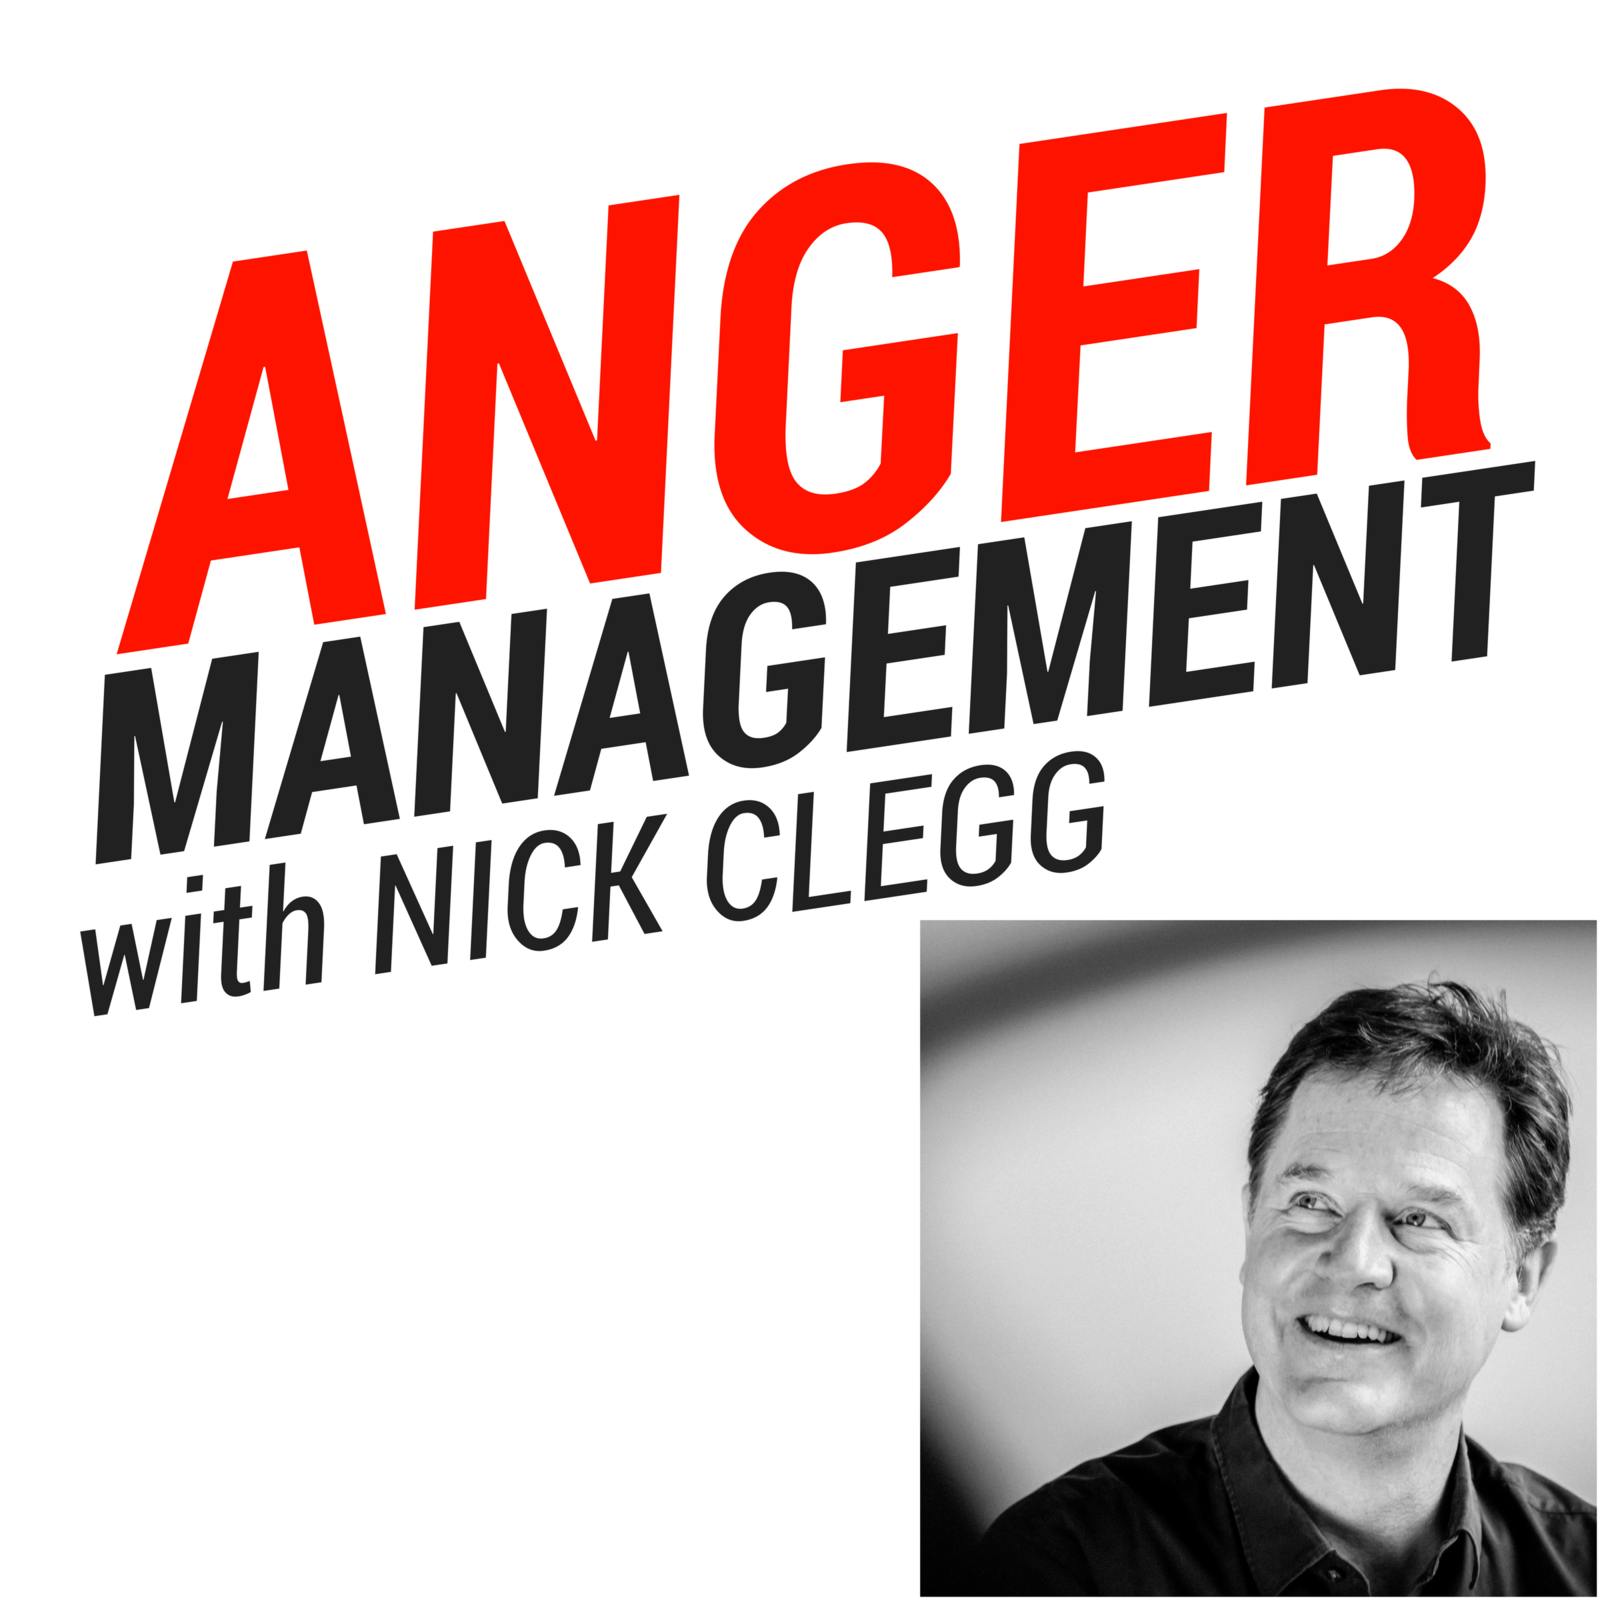 Anger Management with Nick Clegg:Anger Management with Nick Clegg